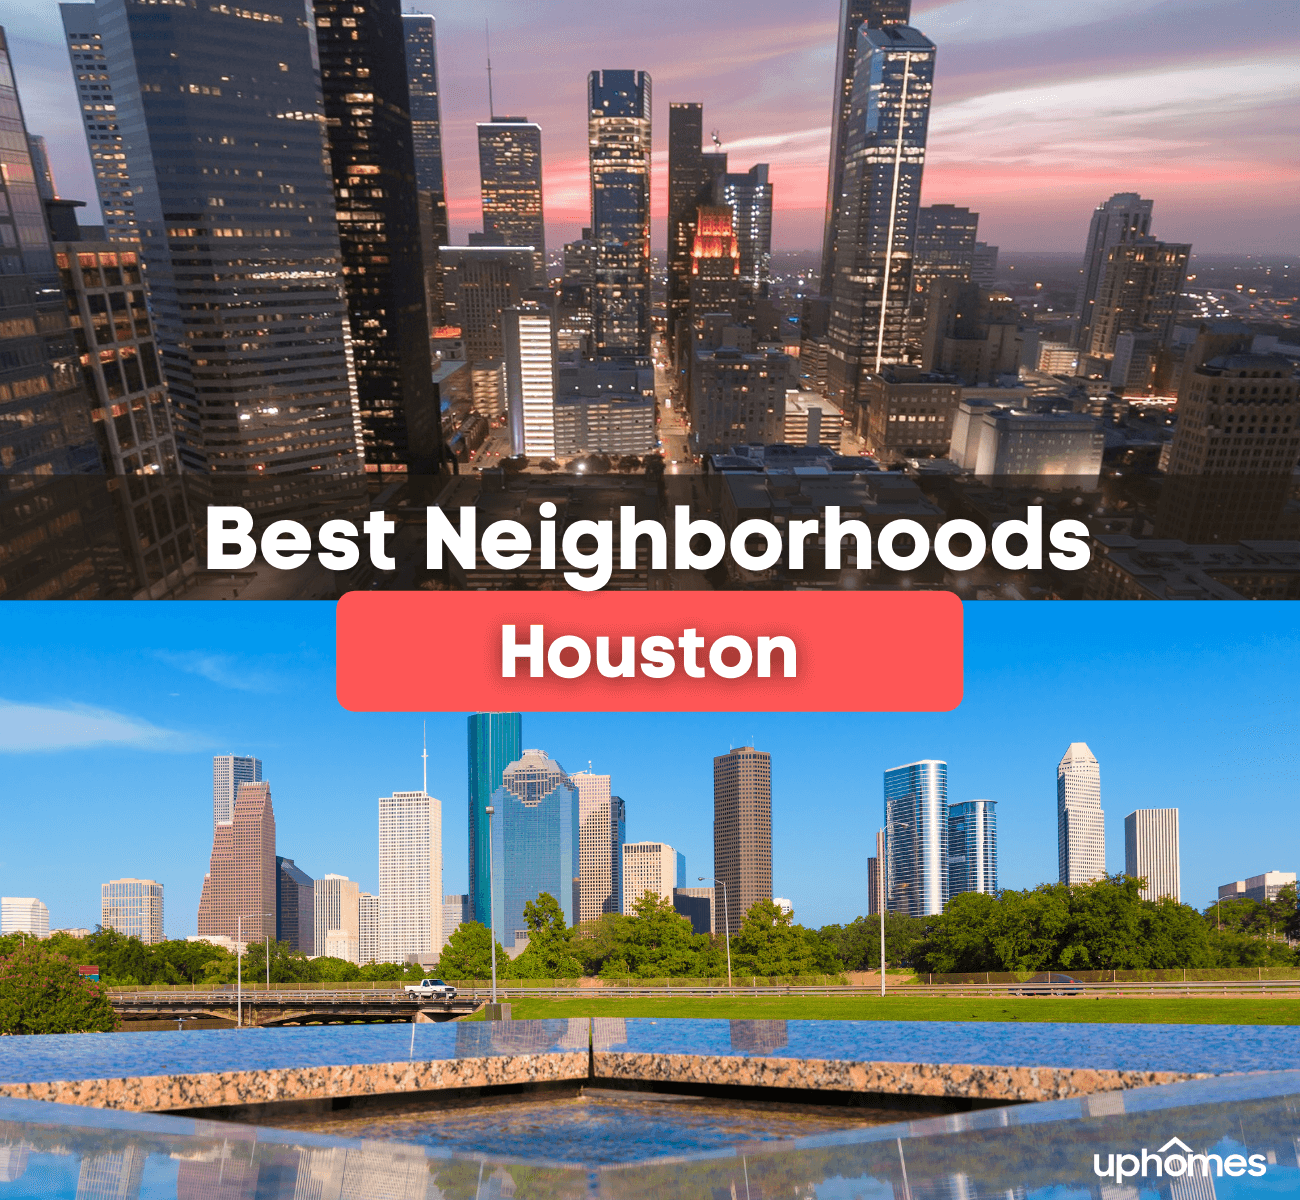 Best Neighborhoods in Houston, TX - What are the best places to live in Houston?